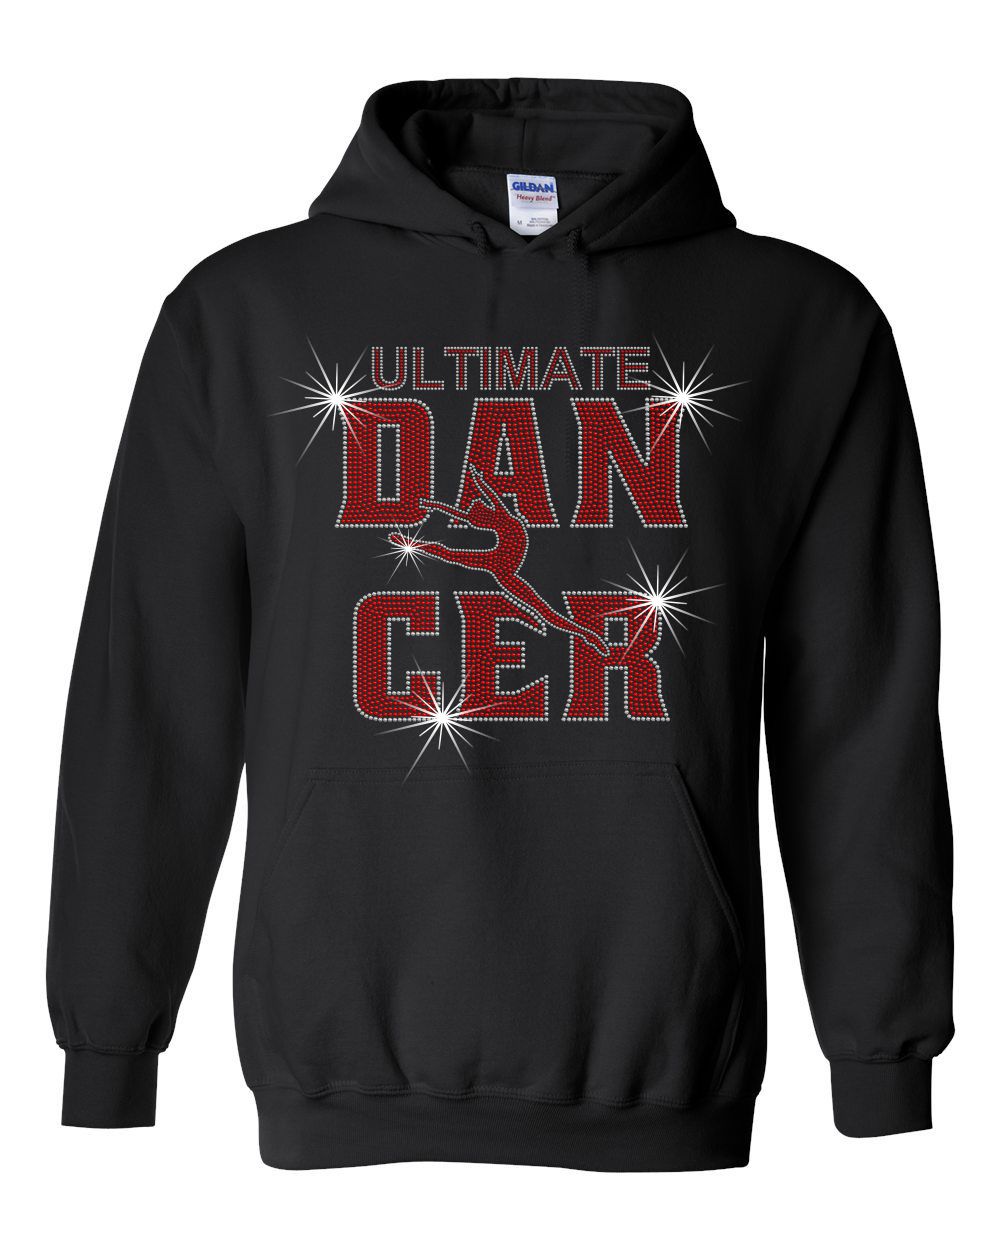 Ultimate Dance On The Move Unisex Hooded Sweatshirt Youth/Adult Sizes DANCER Knockout Design